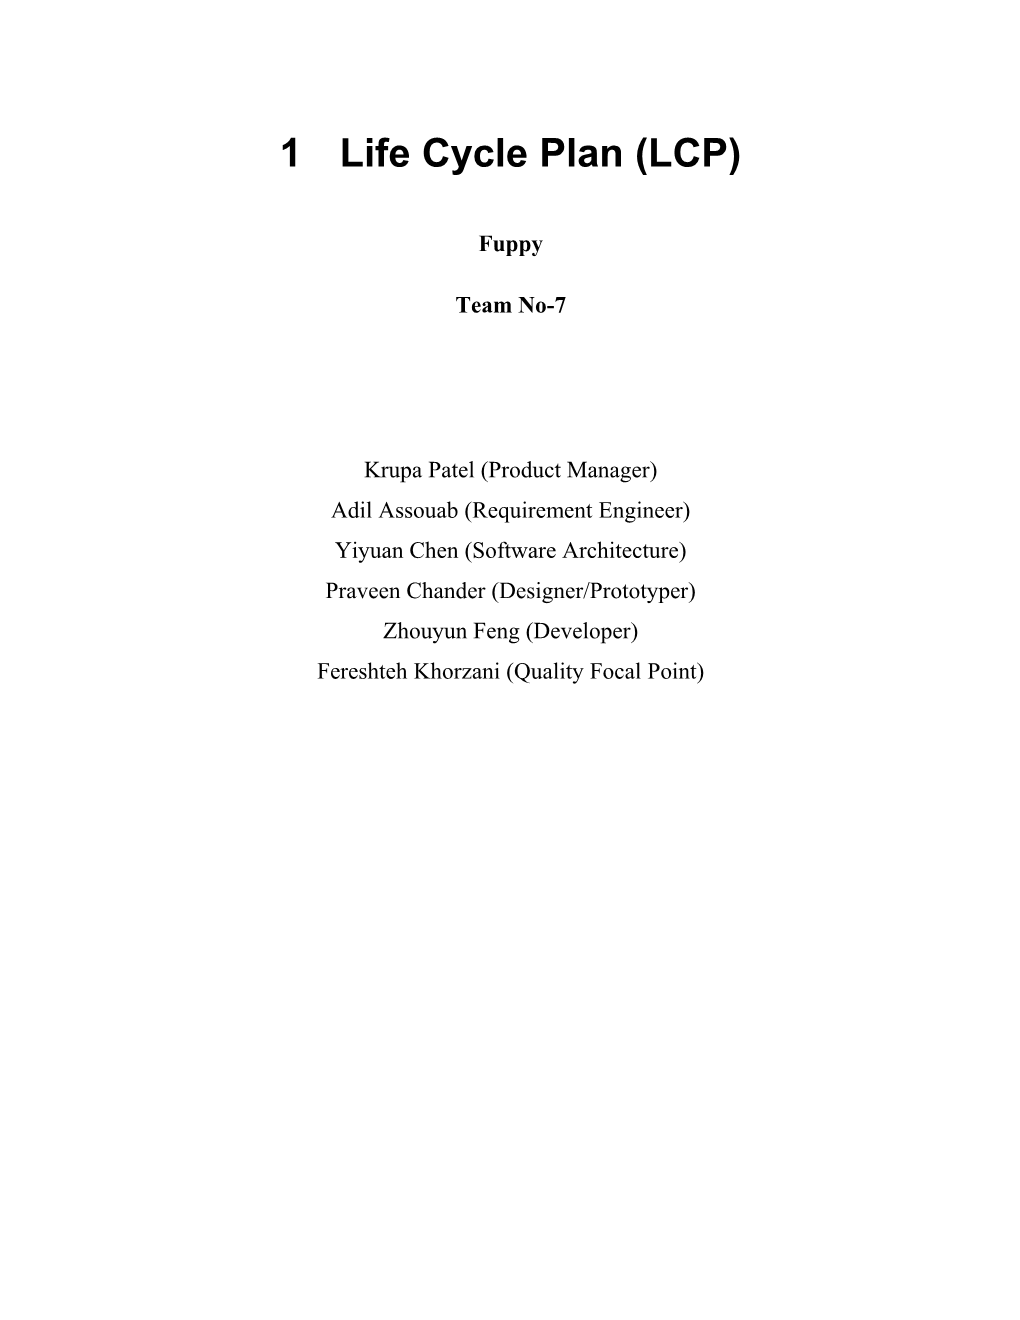 Life Cycle Plan (LCP) Template Version 1.2